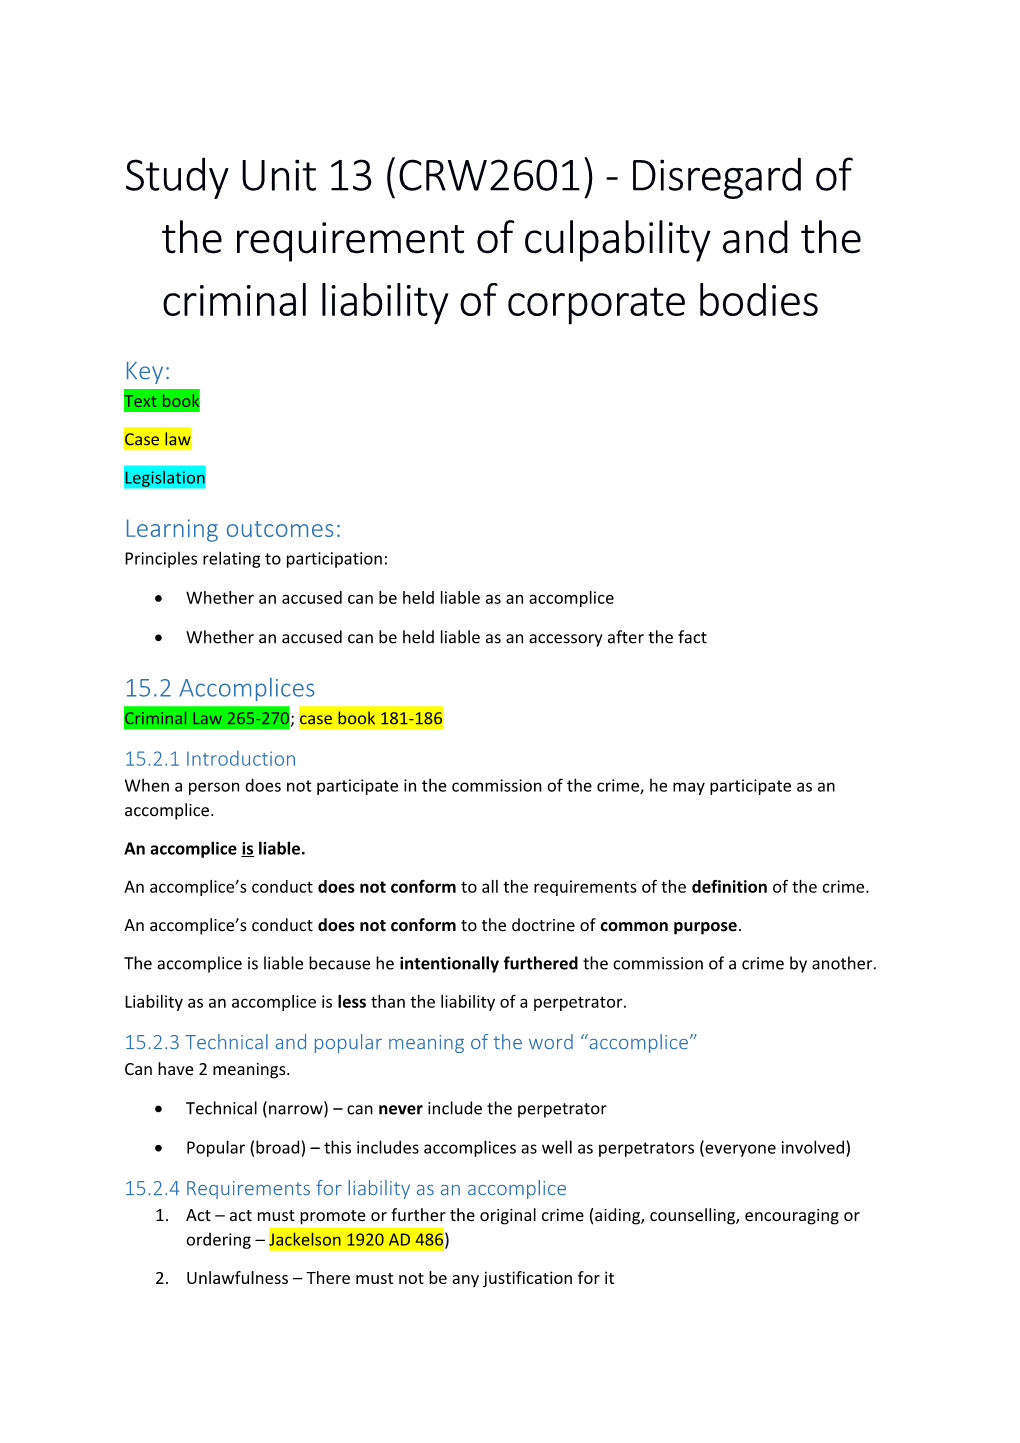 Study Unit 13 (CRW2601) - Disregard of the Requirement of Culpability and the Criminal